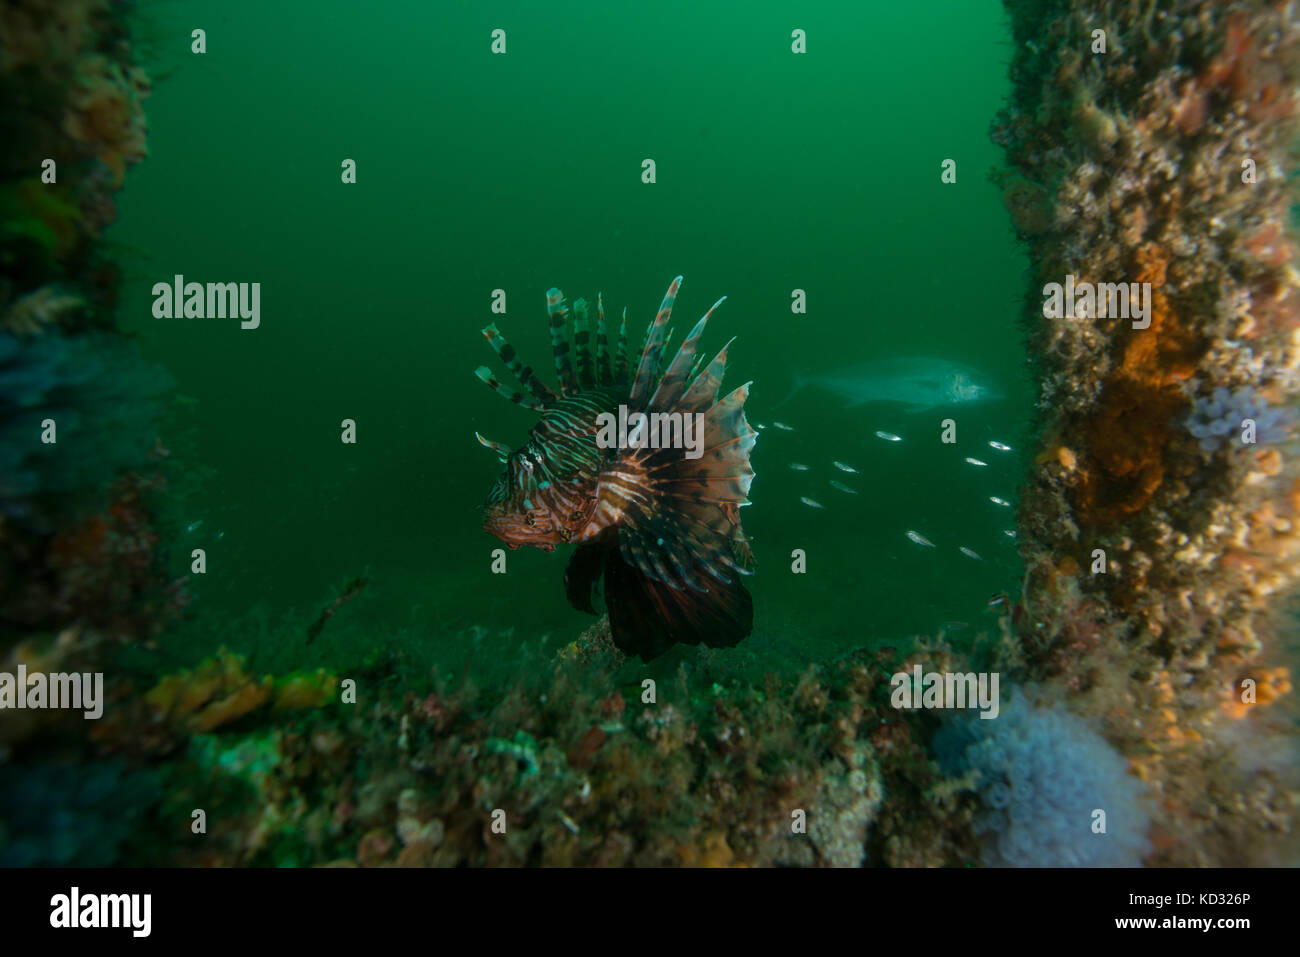 Lionfish feeding by barnacle covered shipwreck, Cancun, Quintana Roo, Mexico, North America Stock Photo